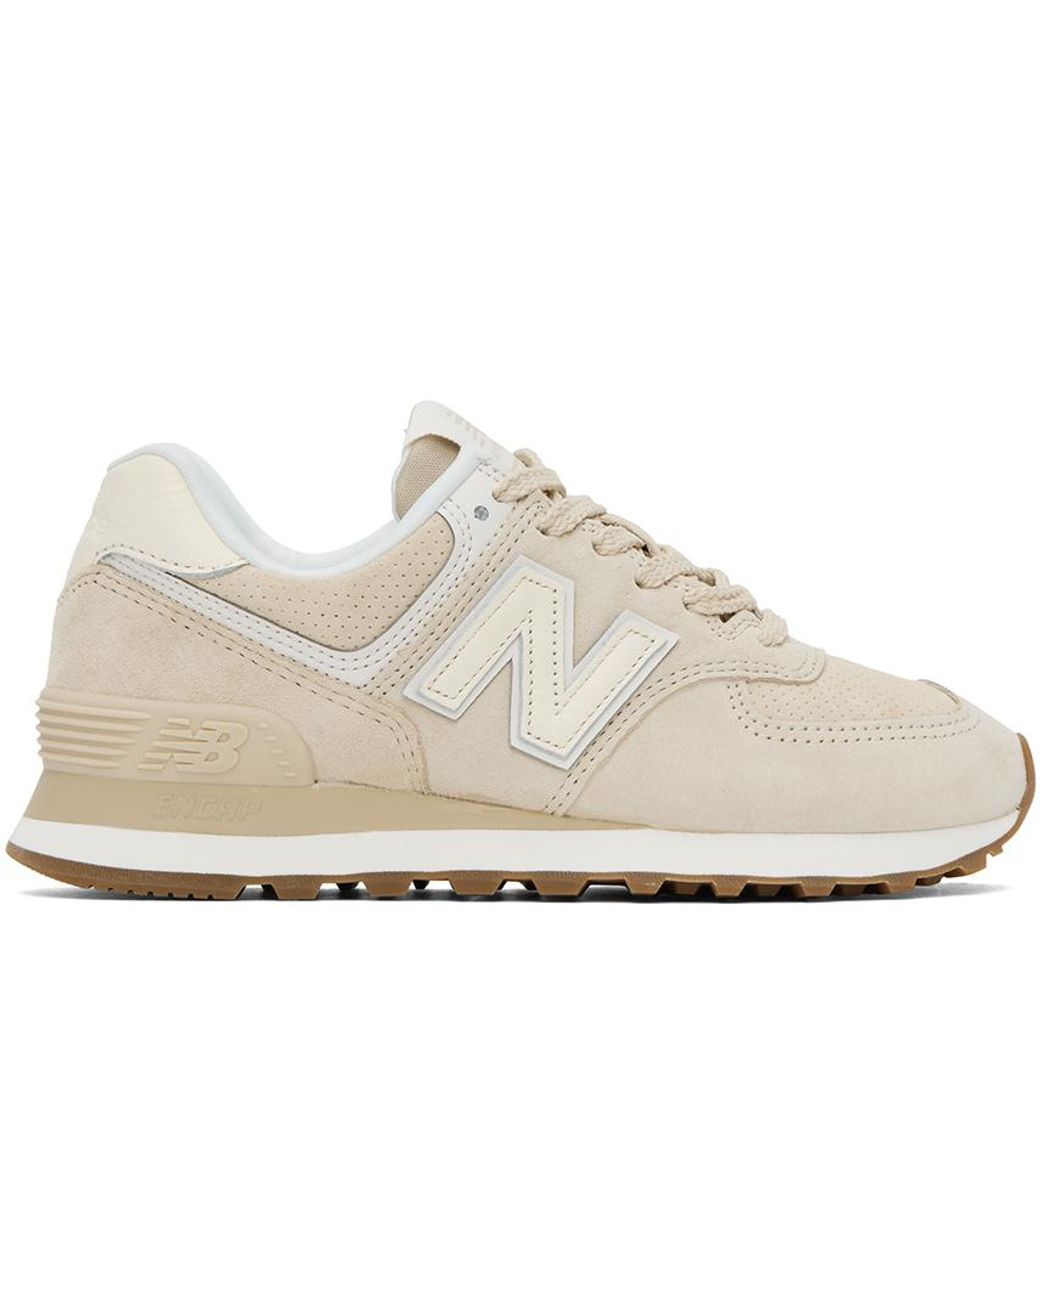 New Balance 574 Casual Sneakers From Finish Line in Natural | Lyst Canada